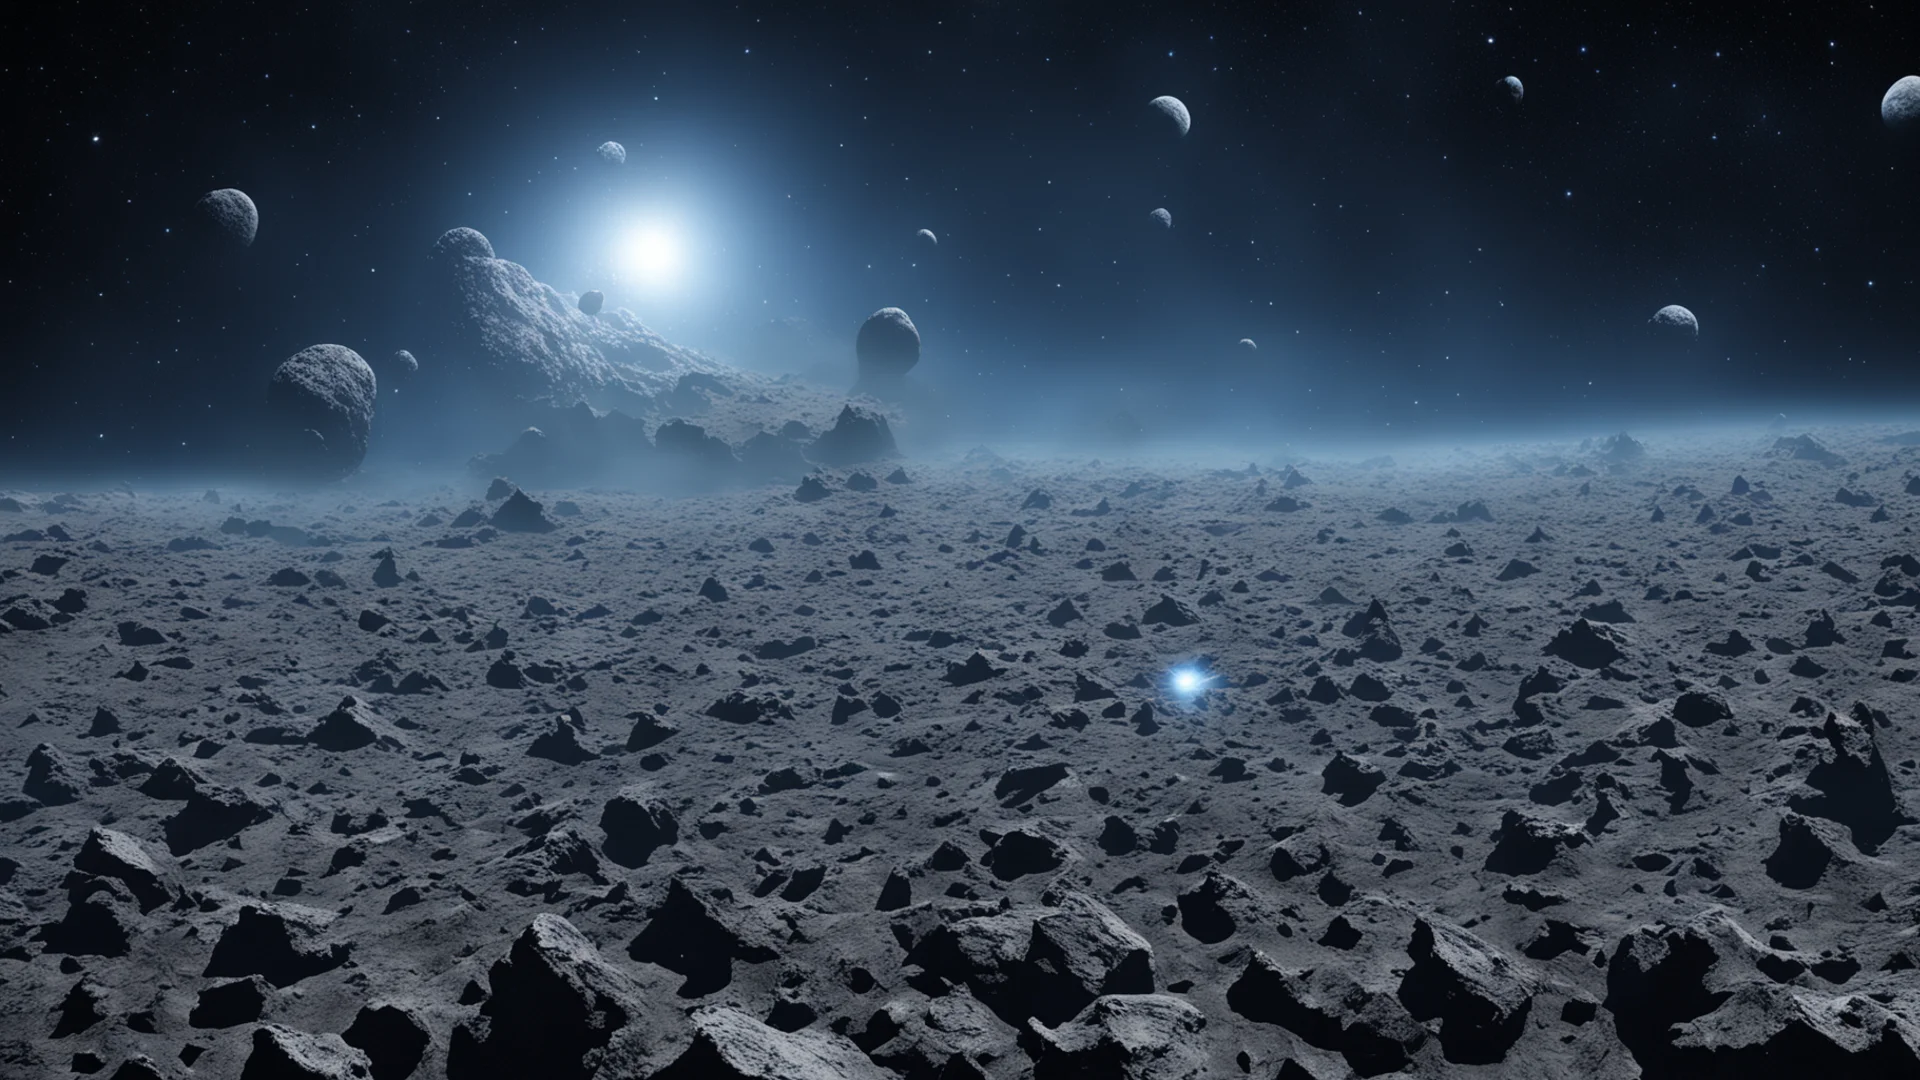 amazing blue and grey asteroid field awesome portrait 2 wide